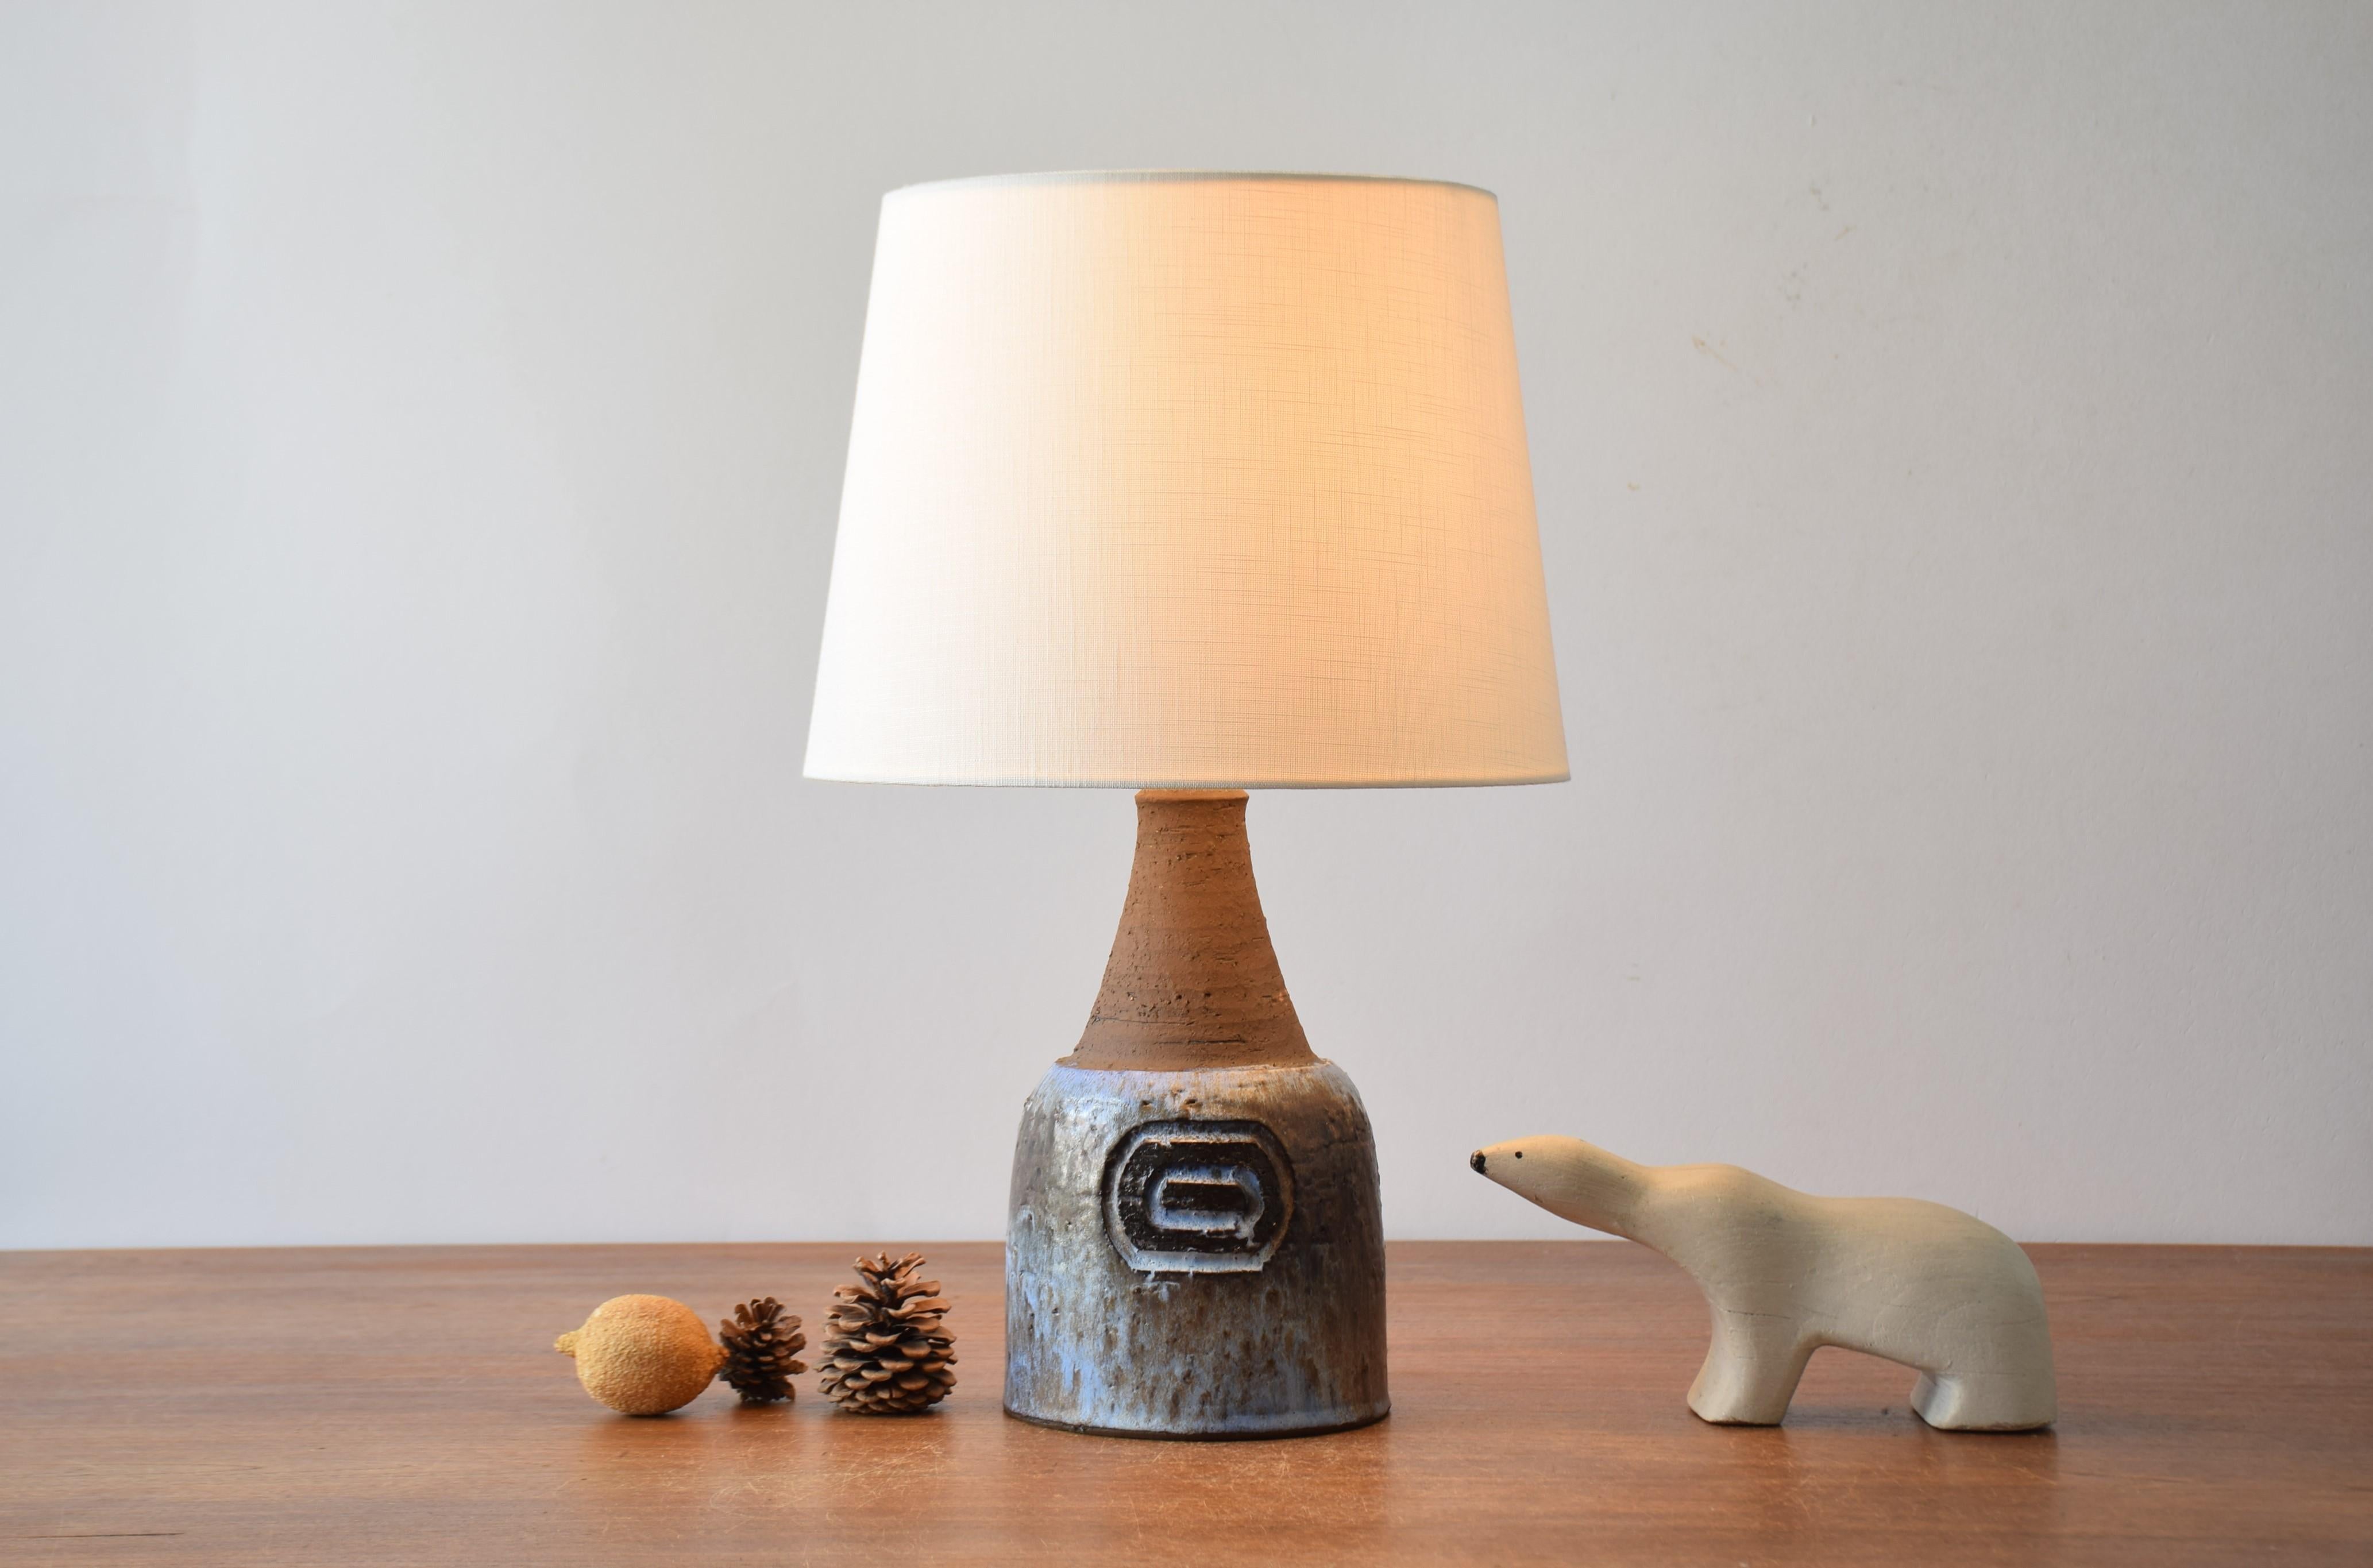 Mid-century Danish Brutalist ceramic table lamp by Fridtjof Sejersen for Sejer Unik ceramic workshop, ca 1960s or 70s. It´s made in his own studio workshop in Nr. Aaby on the Danish island Funen. Fridtjof Sejersen ran his studio from 1941 to